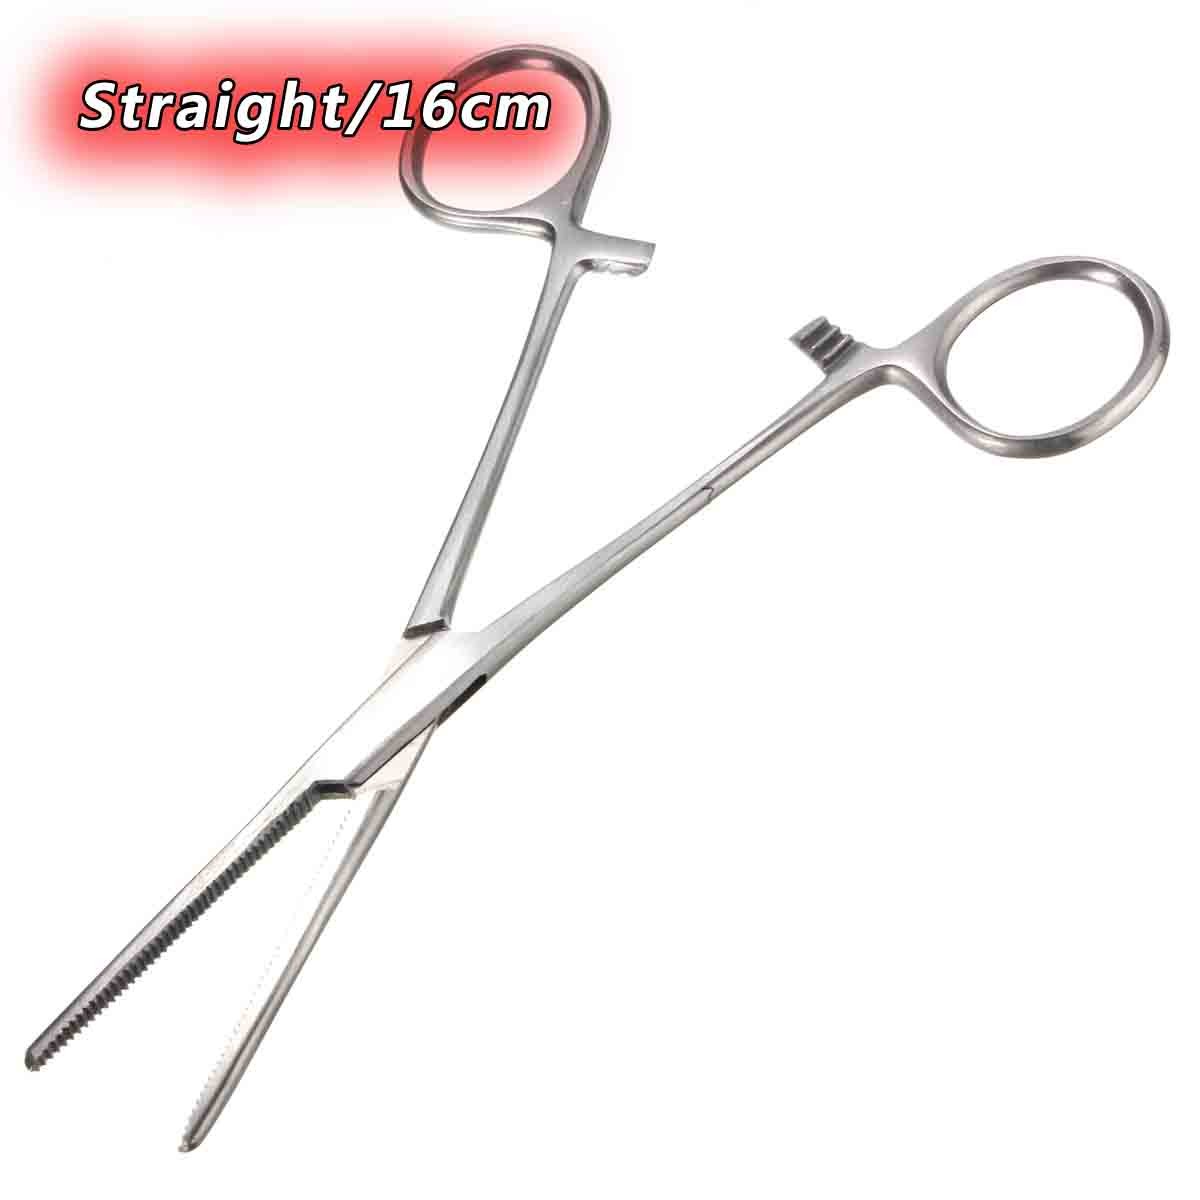 Hemostat-Forceps-Straight-Curved-Stainless-Steel-Locking-Clamp-1039903-5